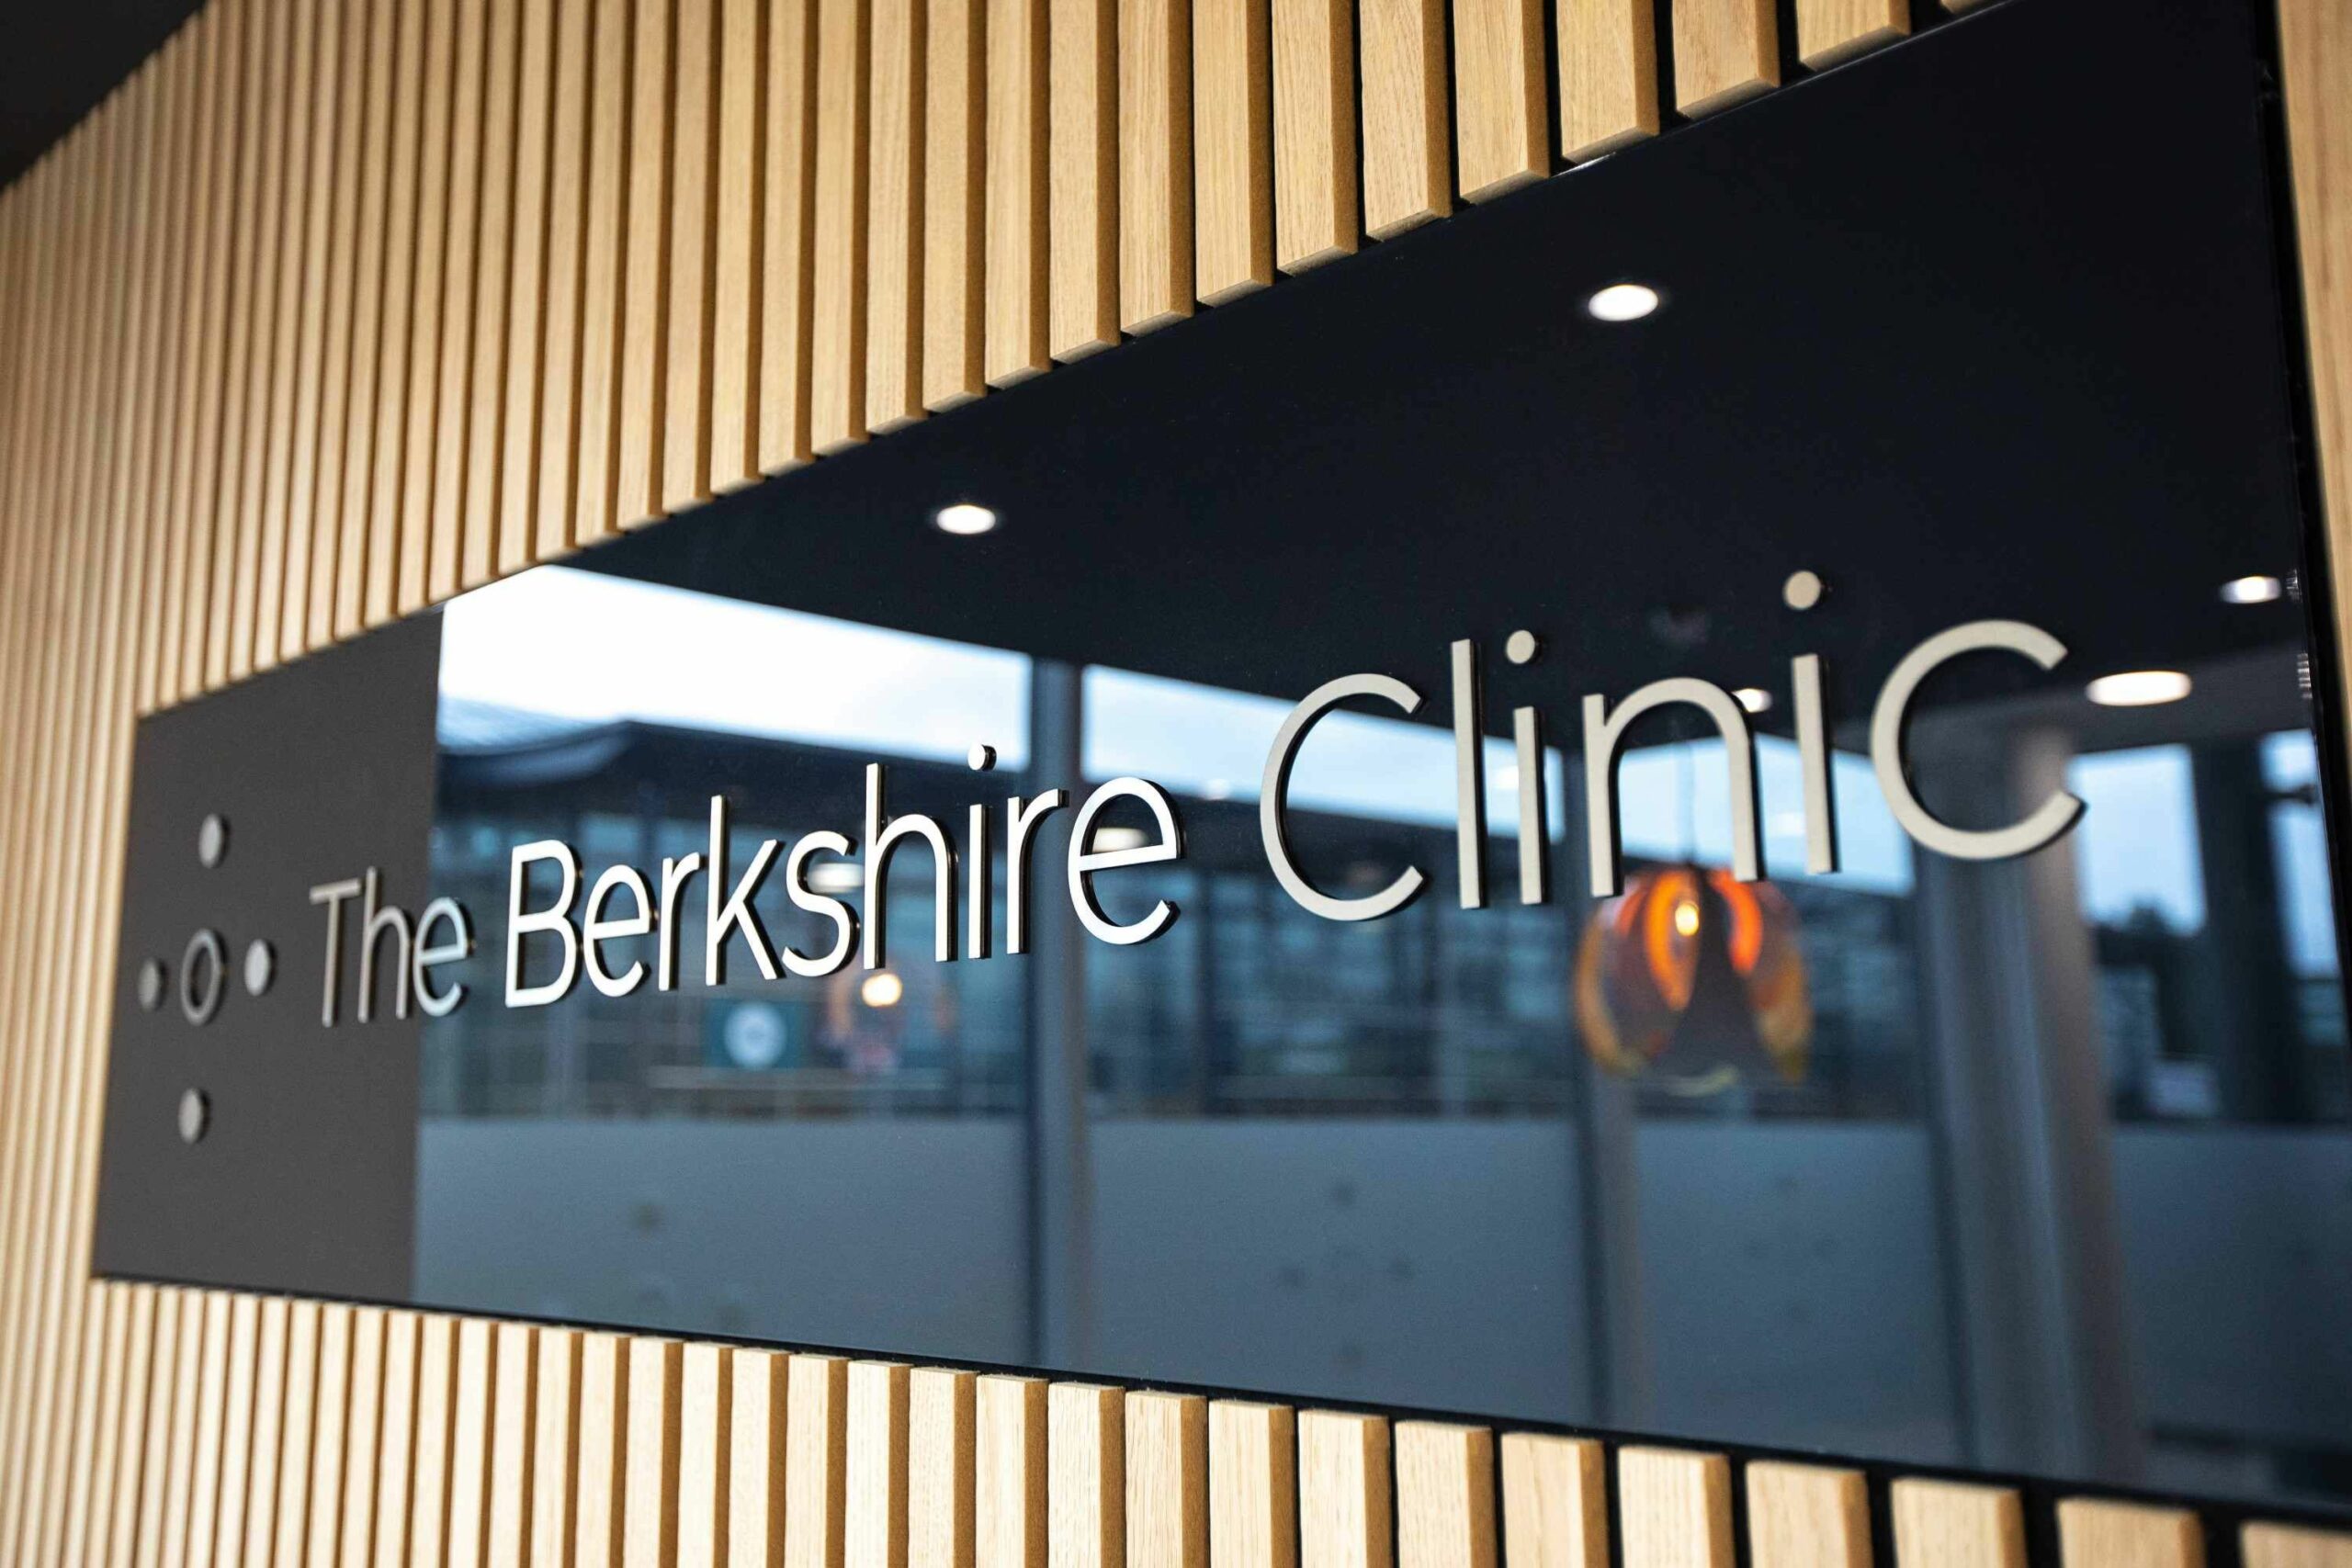 The Berkshire Clinic sign.